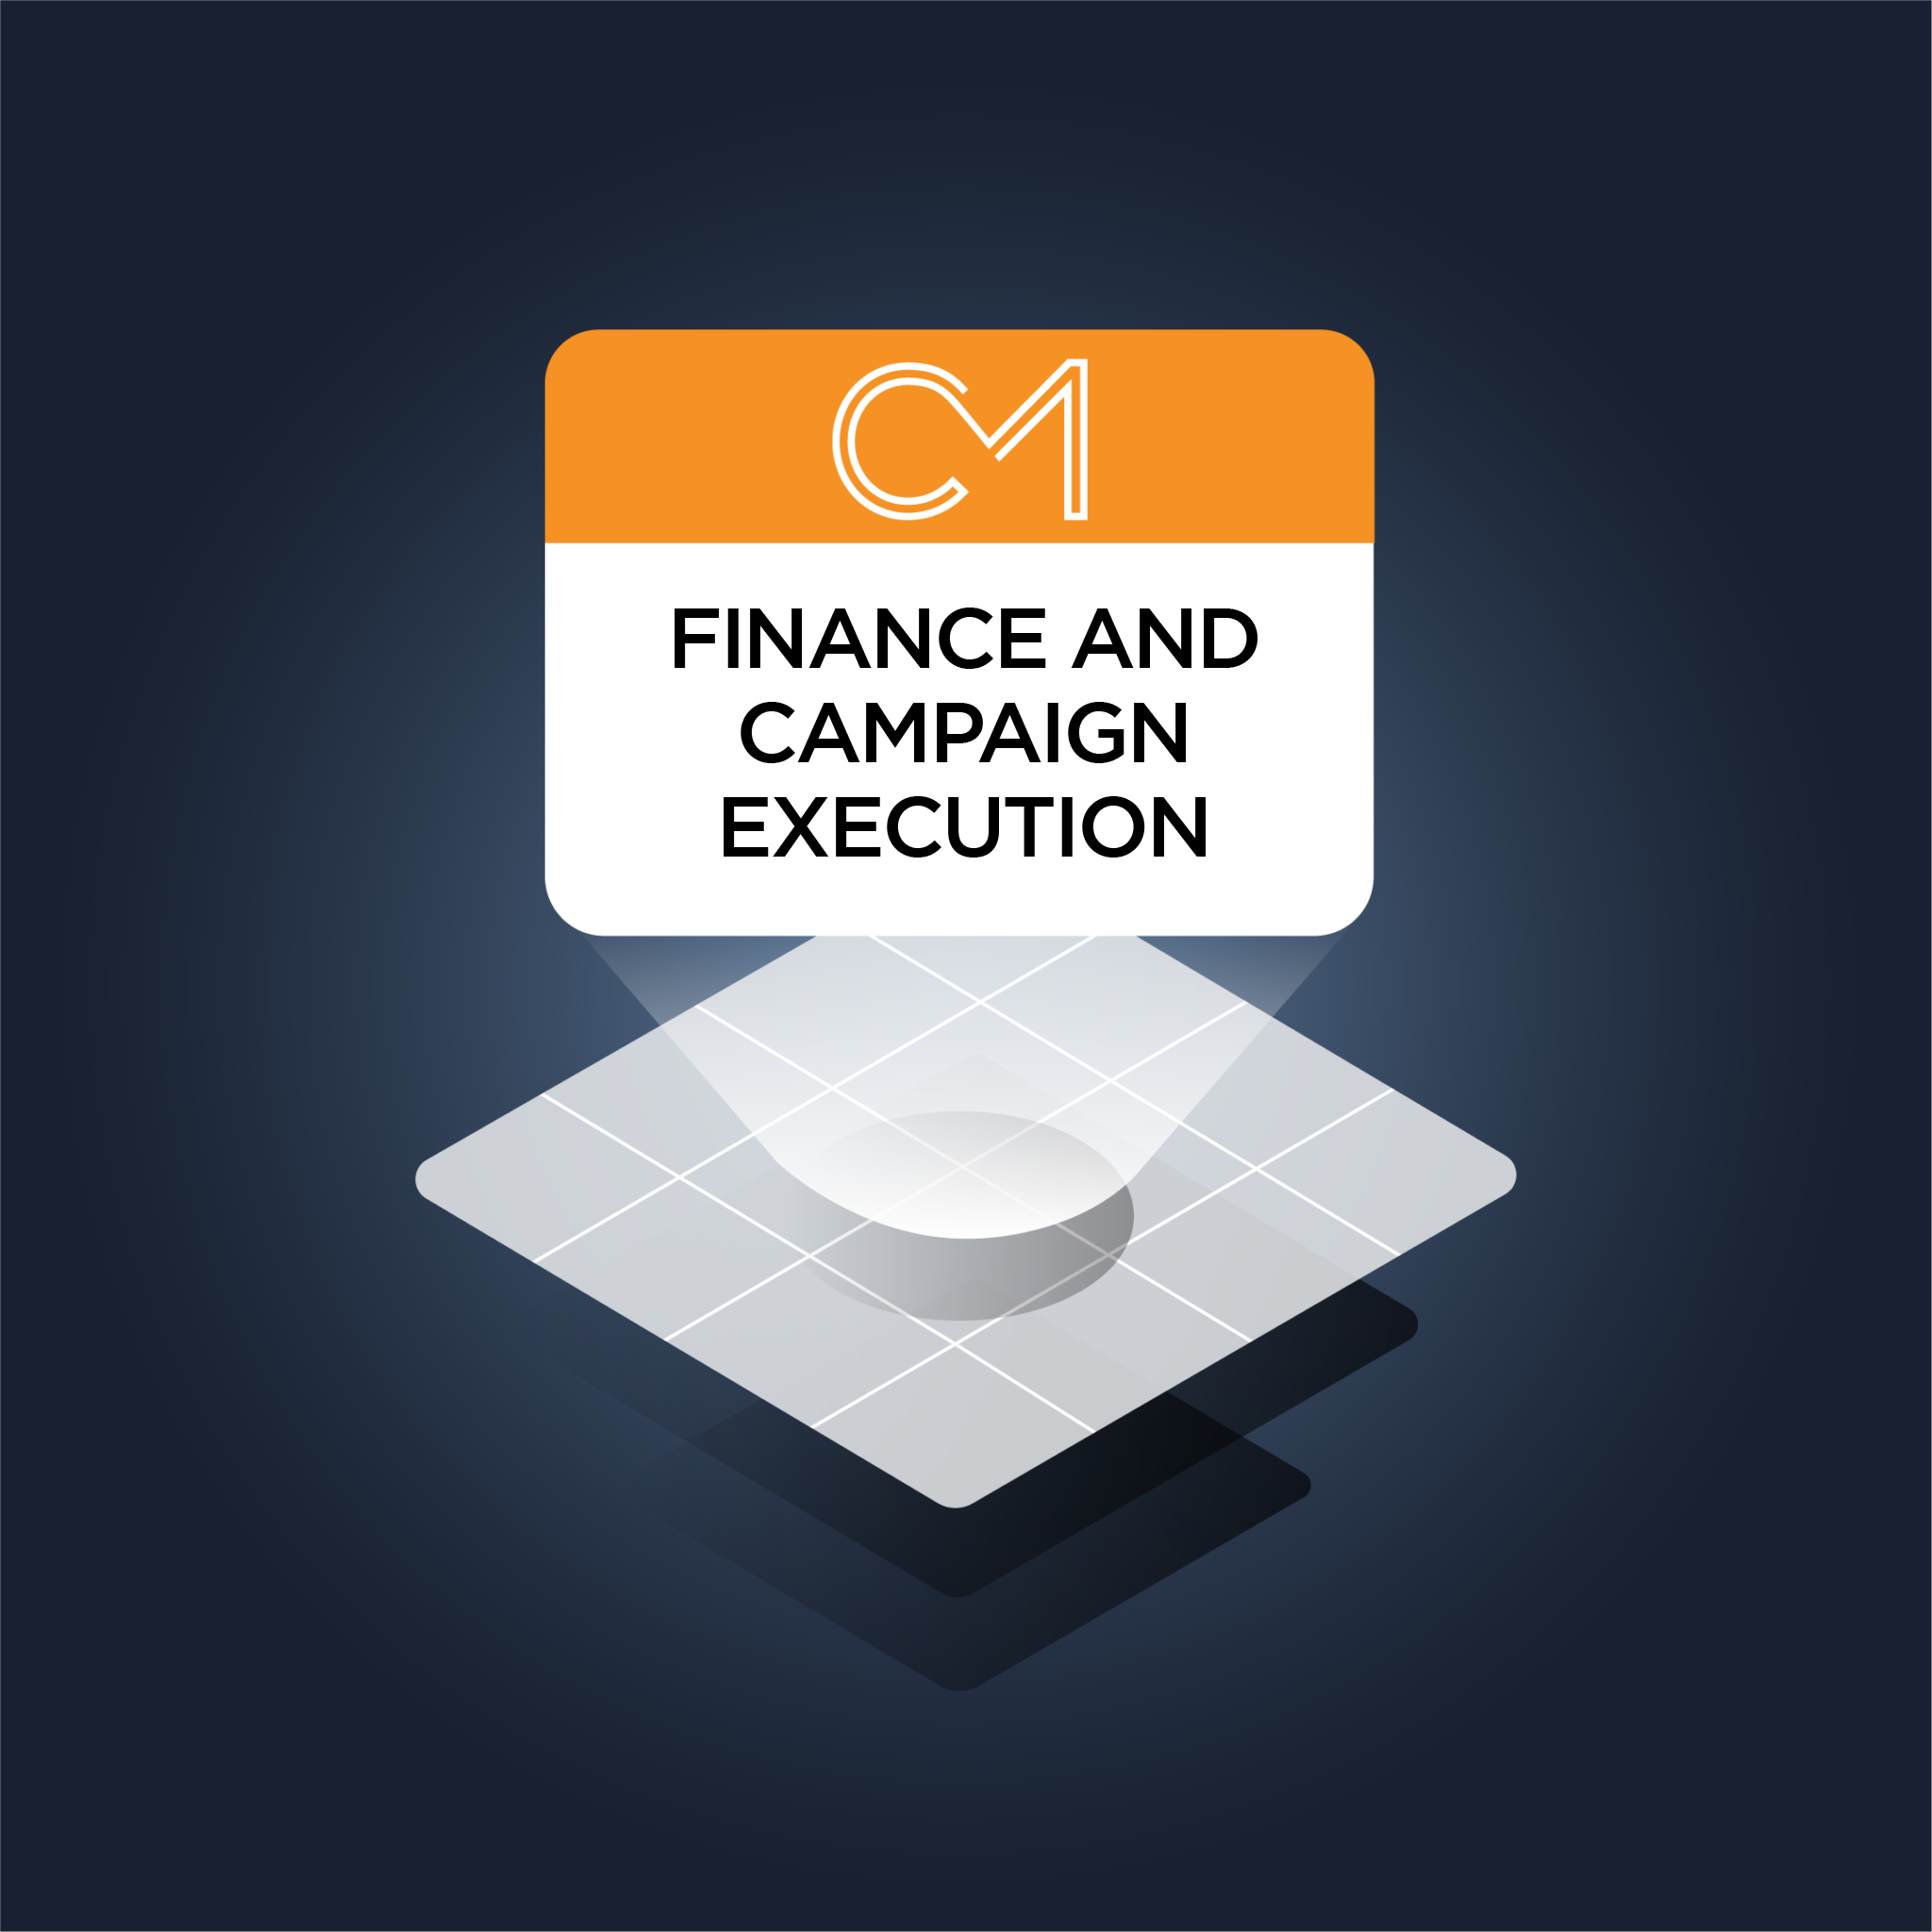 CM Finance and Campaign Execution